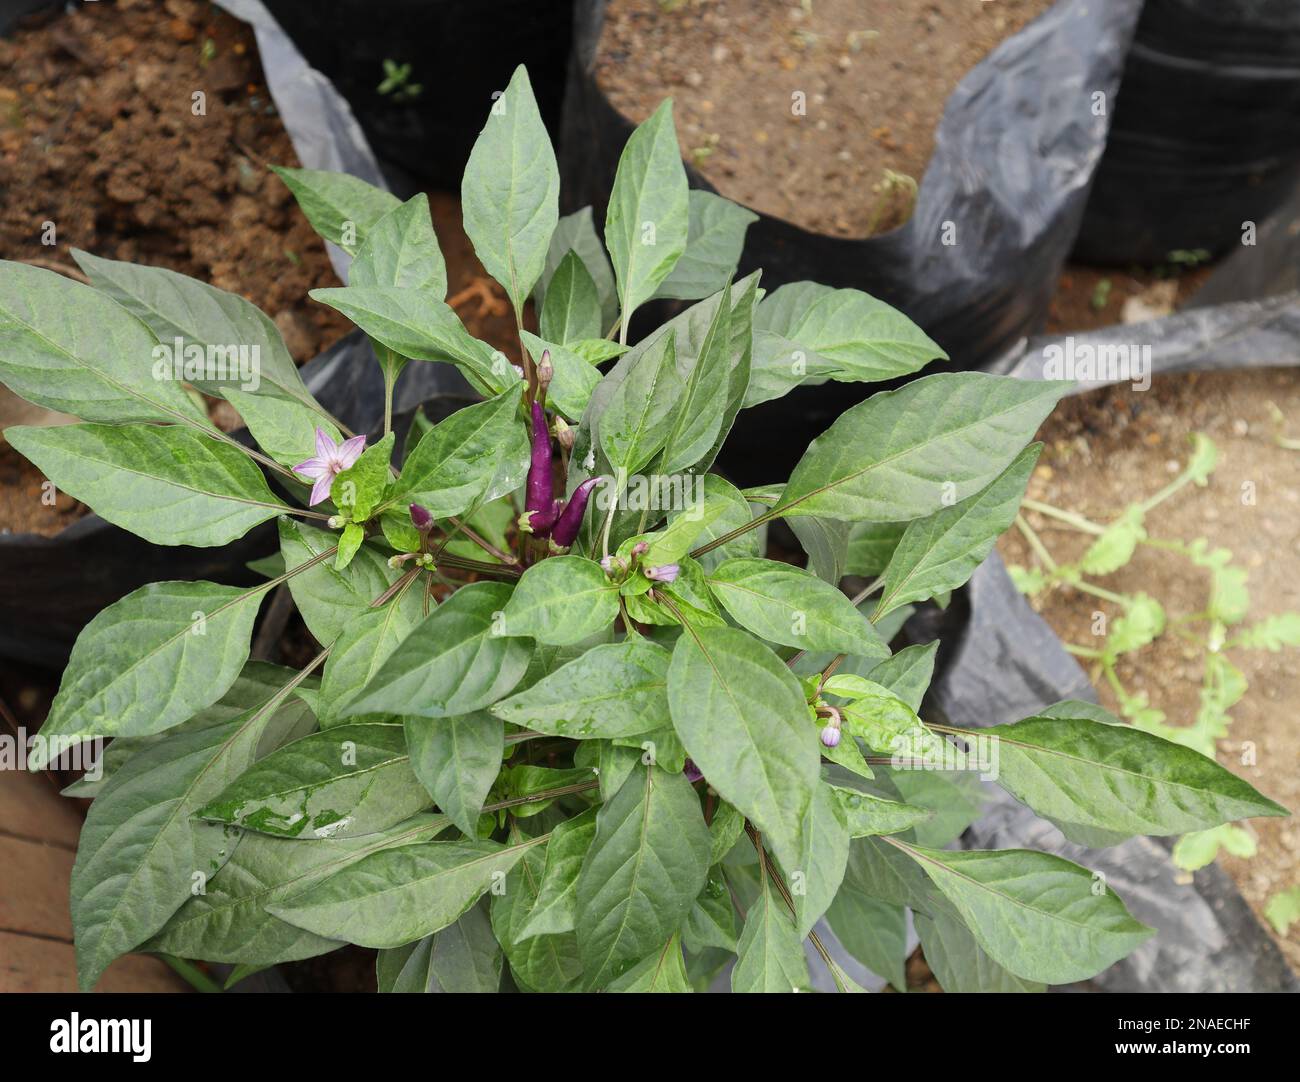 A purple chili variety plant with purple chili spikes and flowers in an outdoor plant nursery Stock Photo